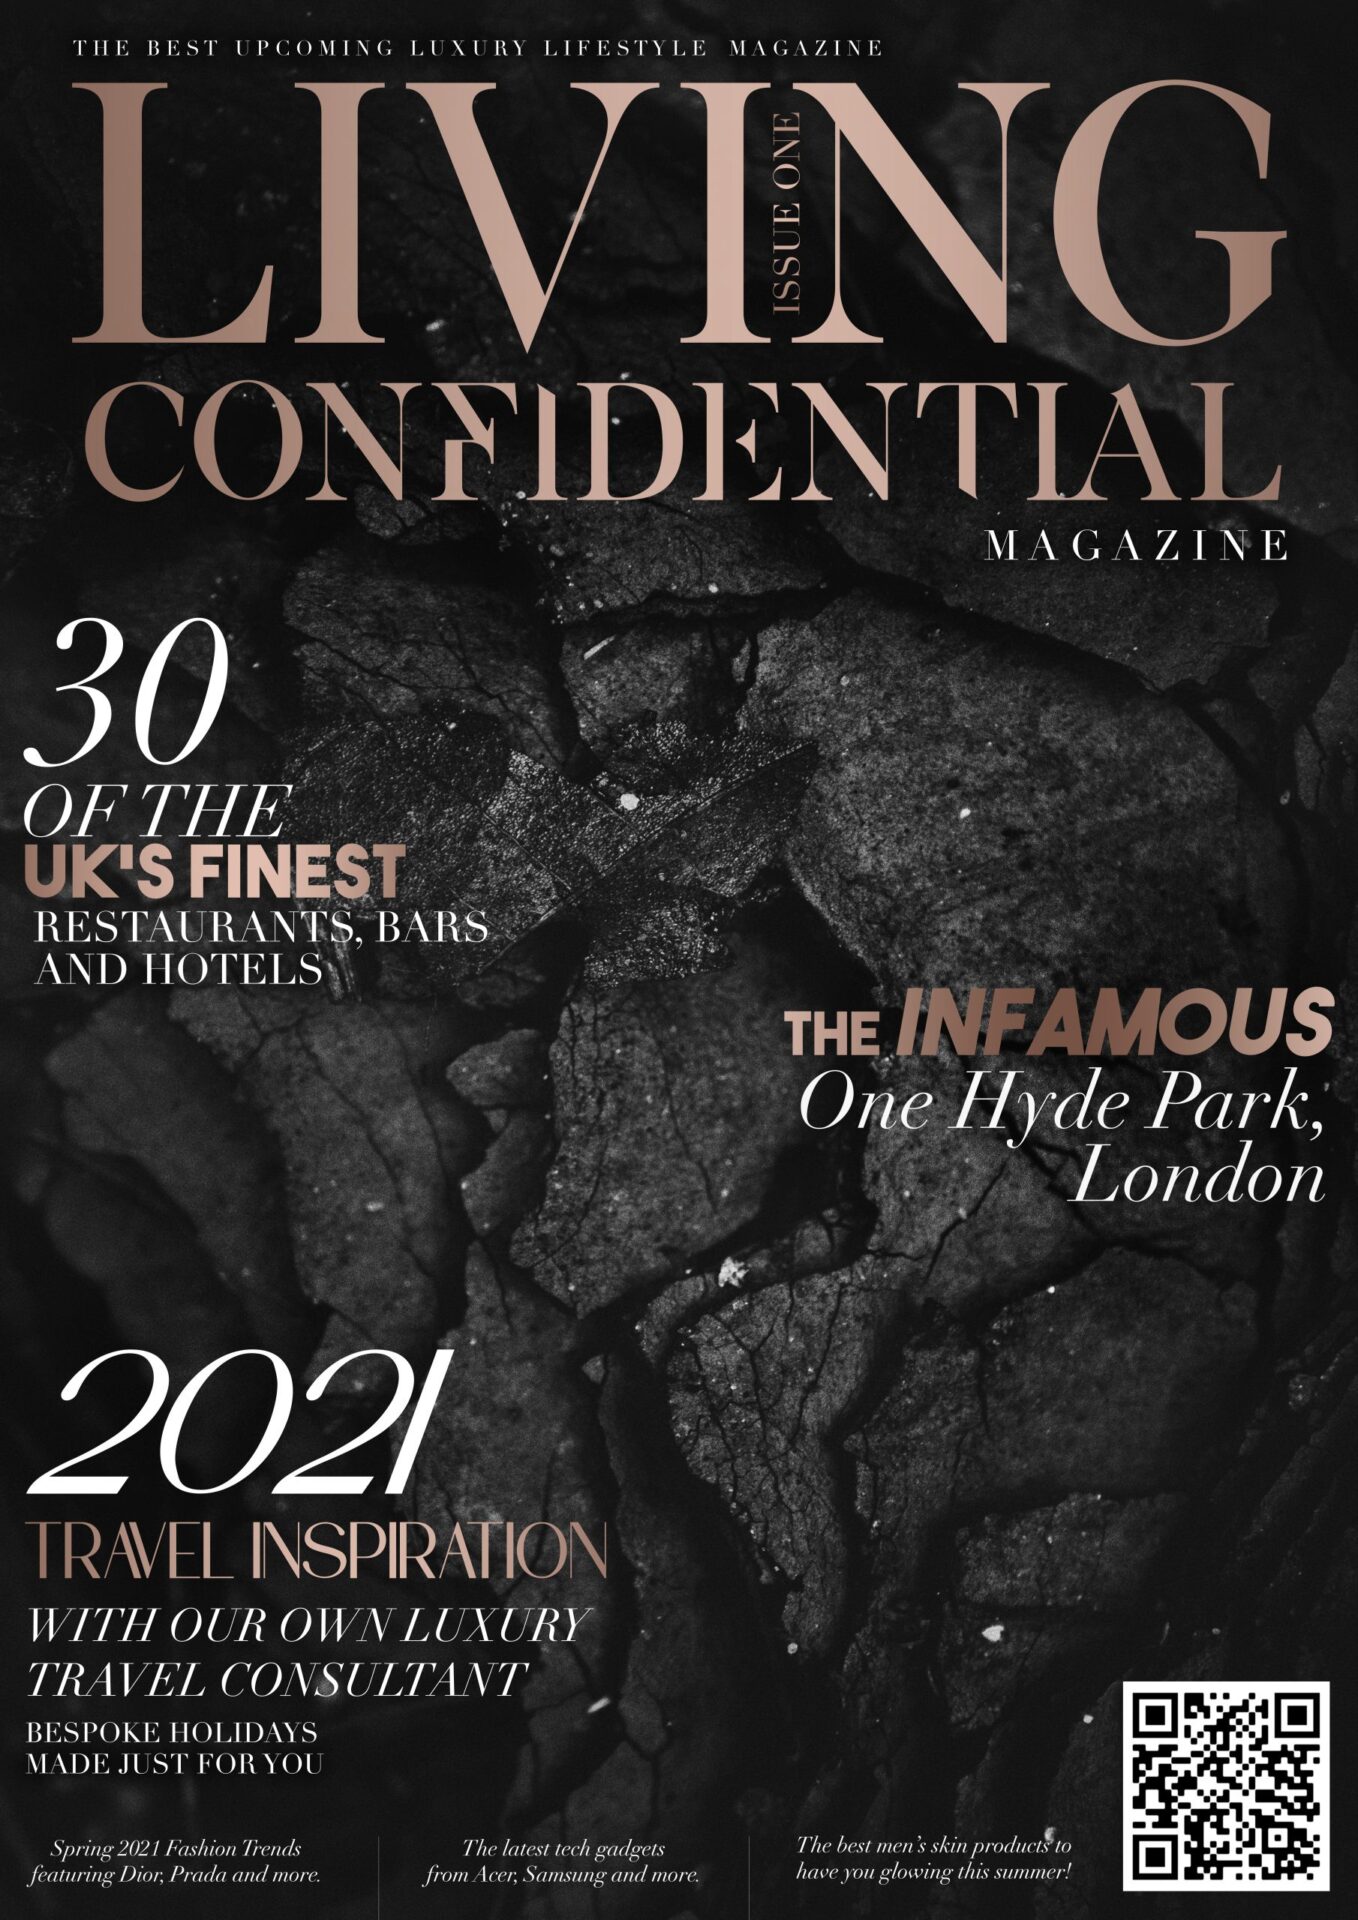 Magazine cover of the Living Confidential